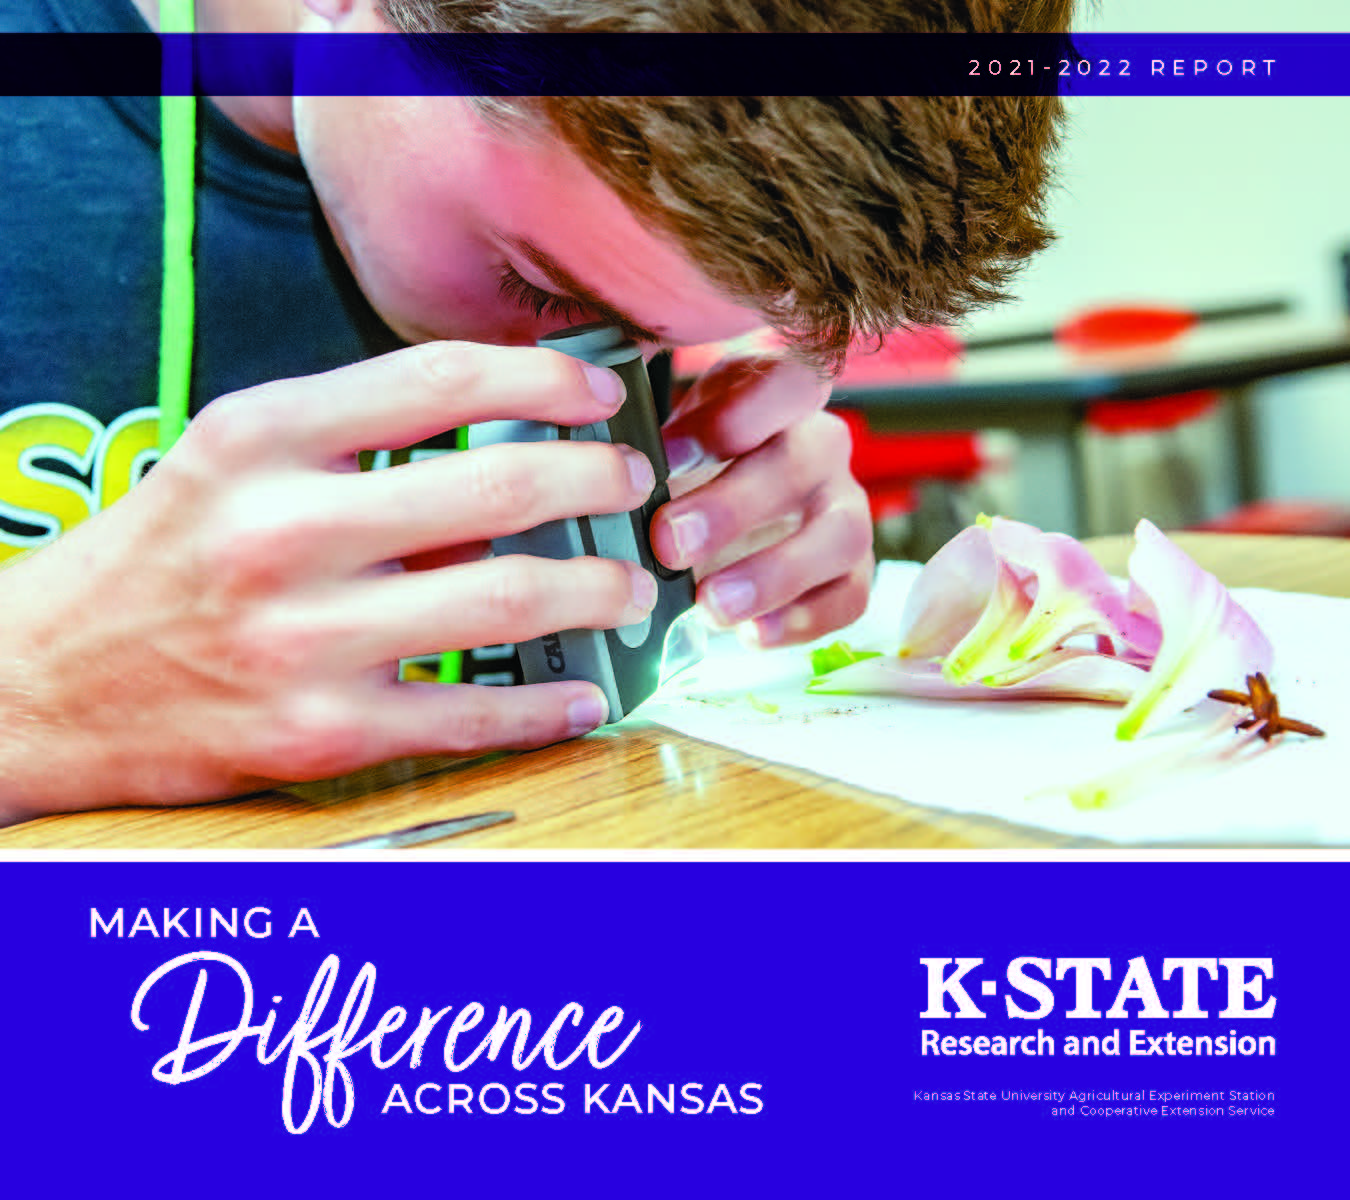 Making a Difference across Kansas